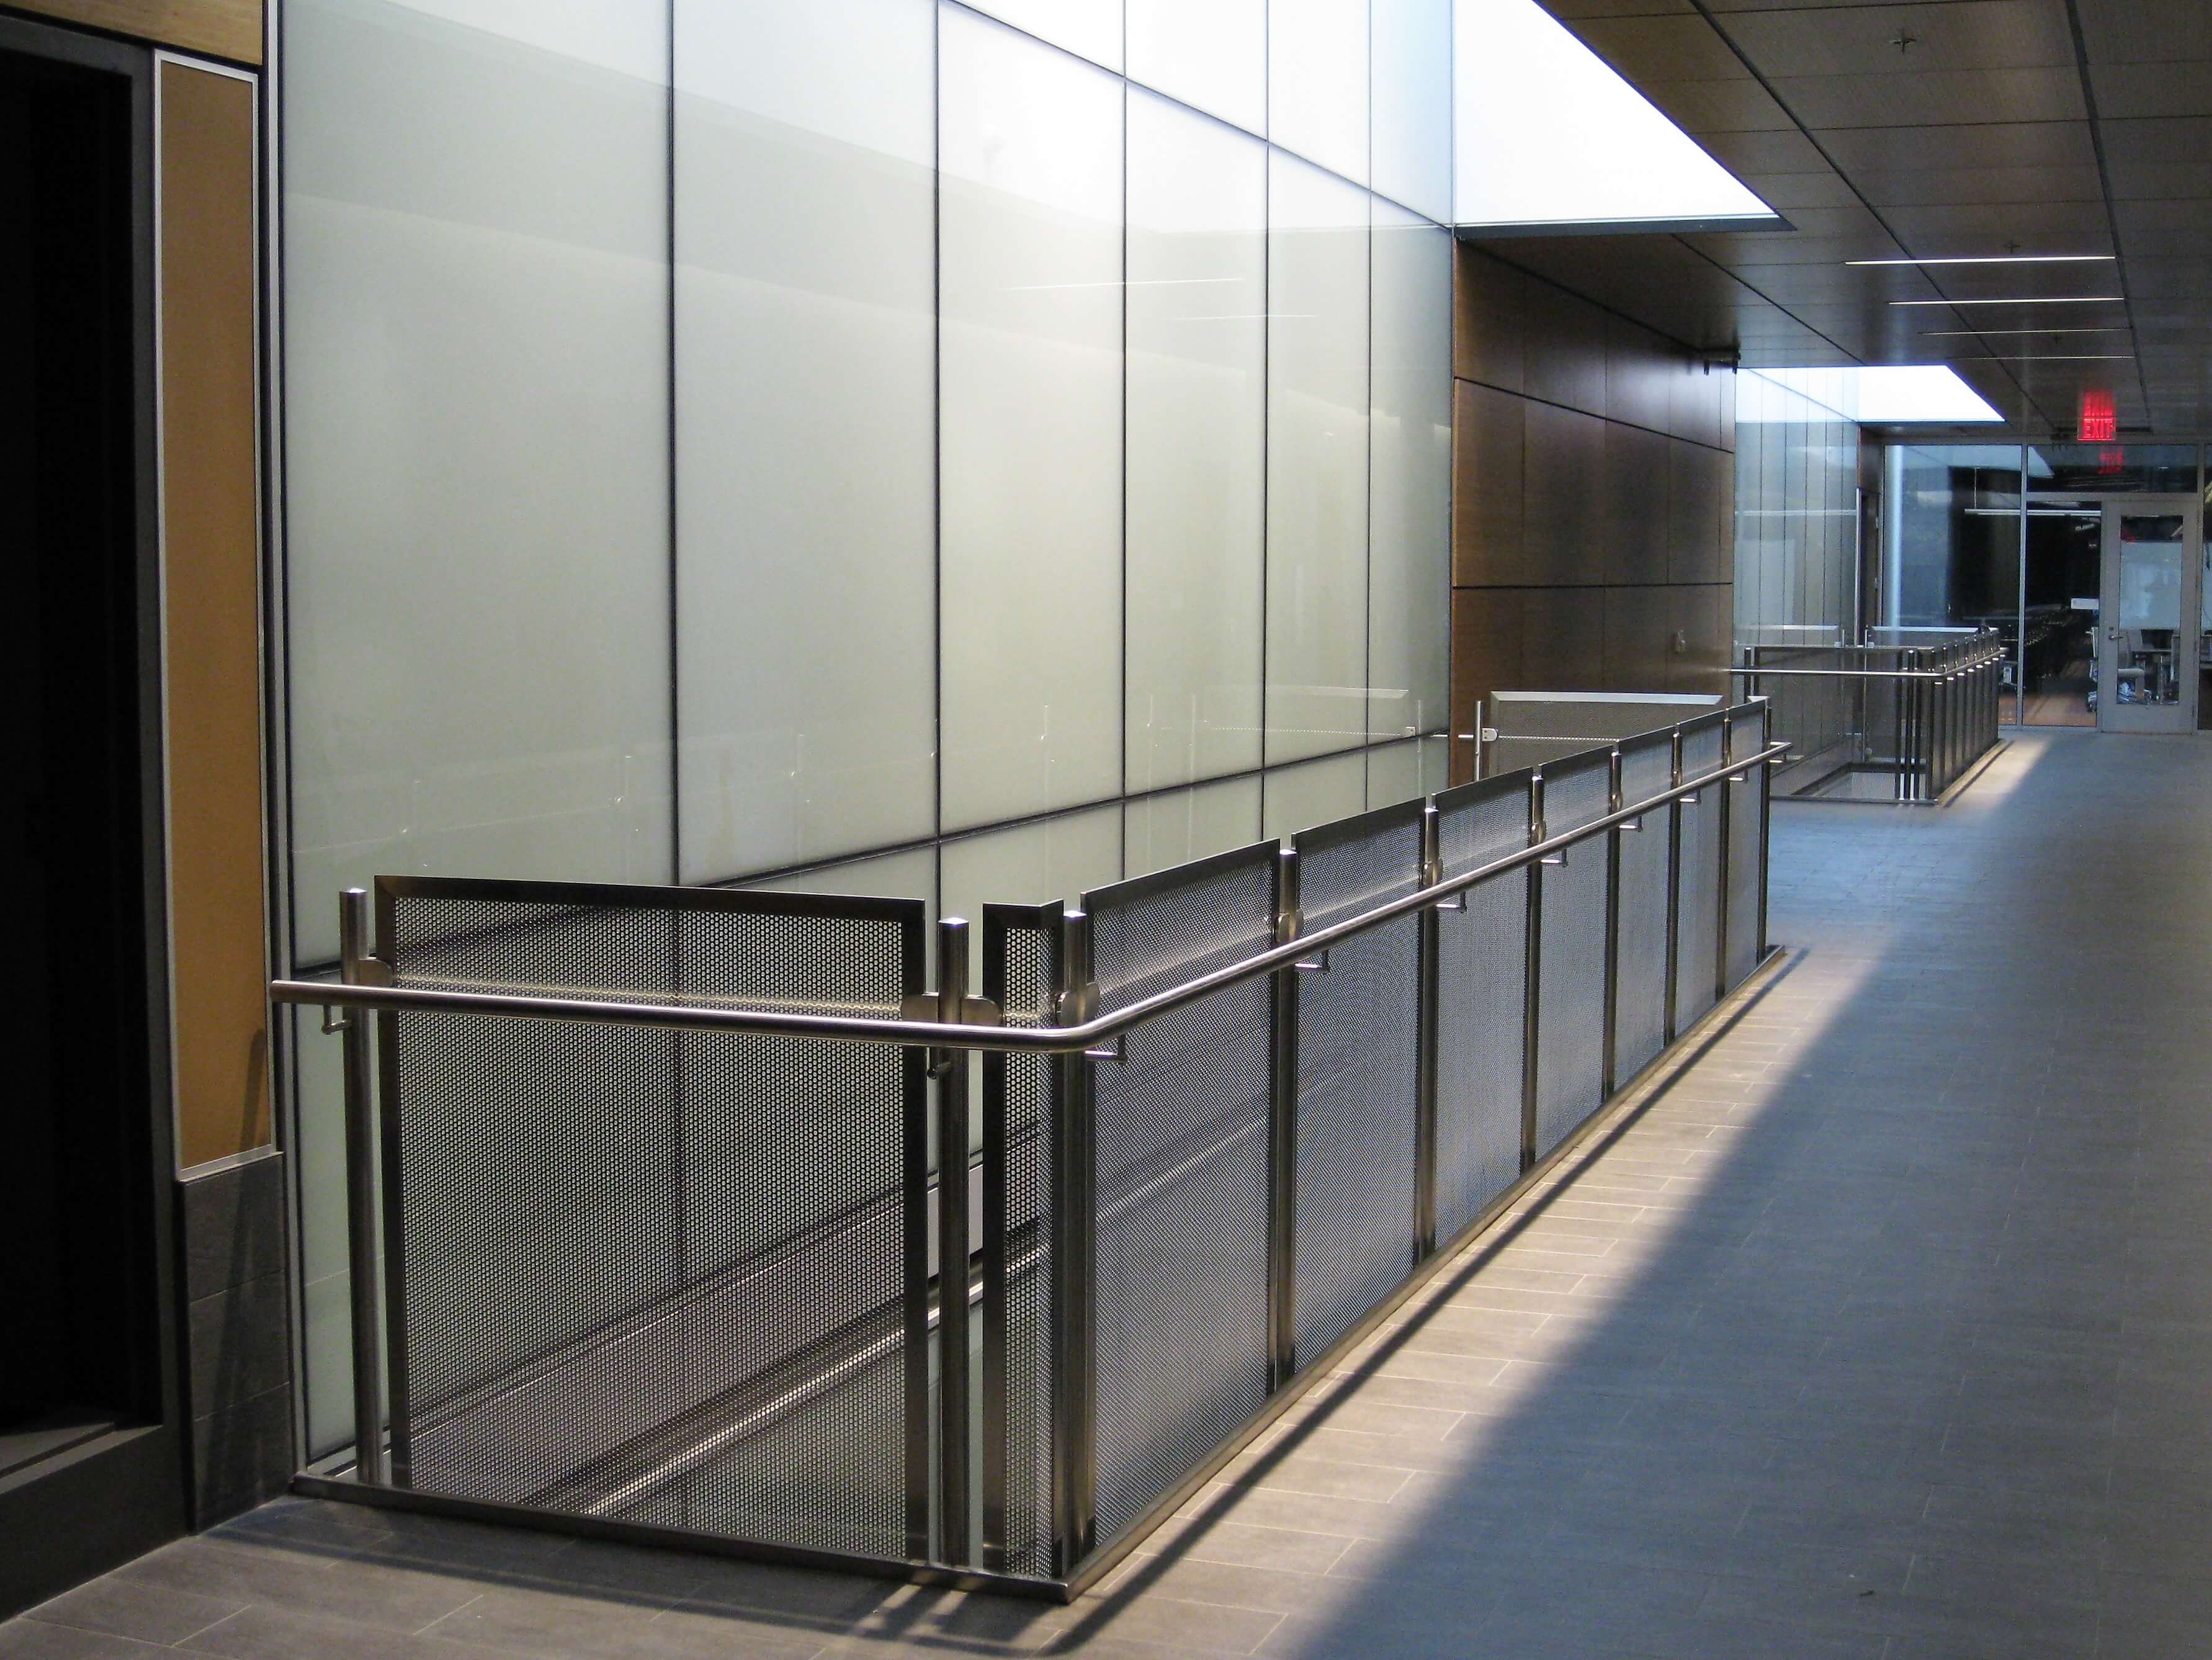 Circum handrail installation with stainless steel infill at Central Michigan University, MI.